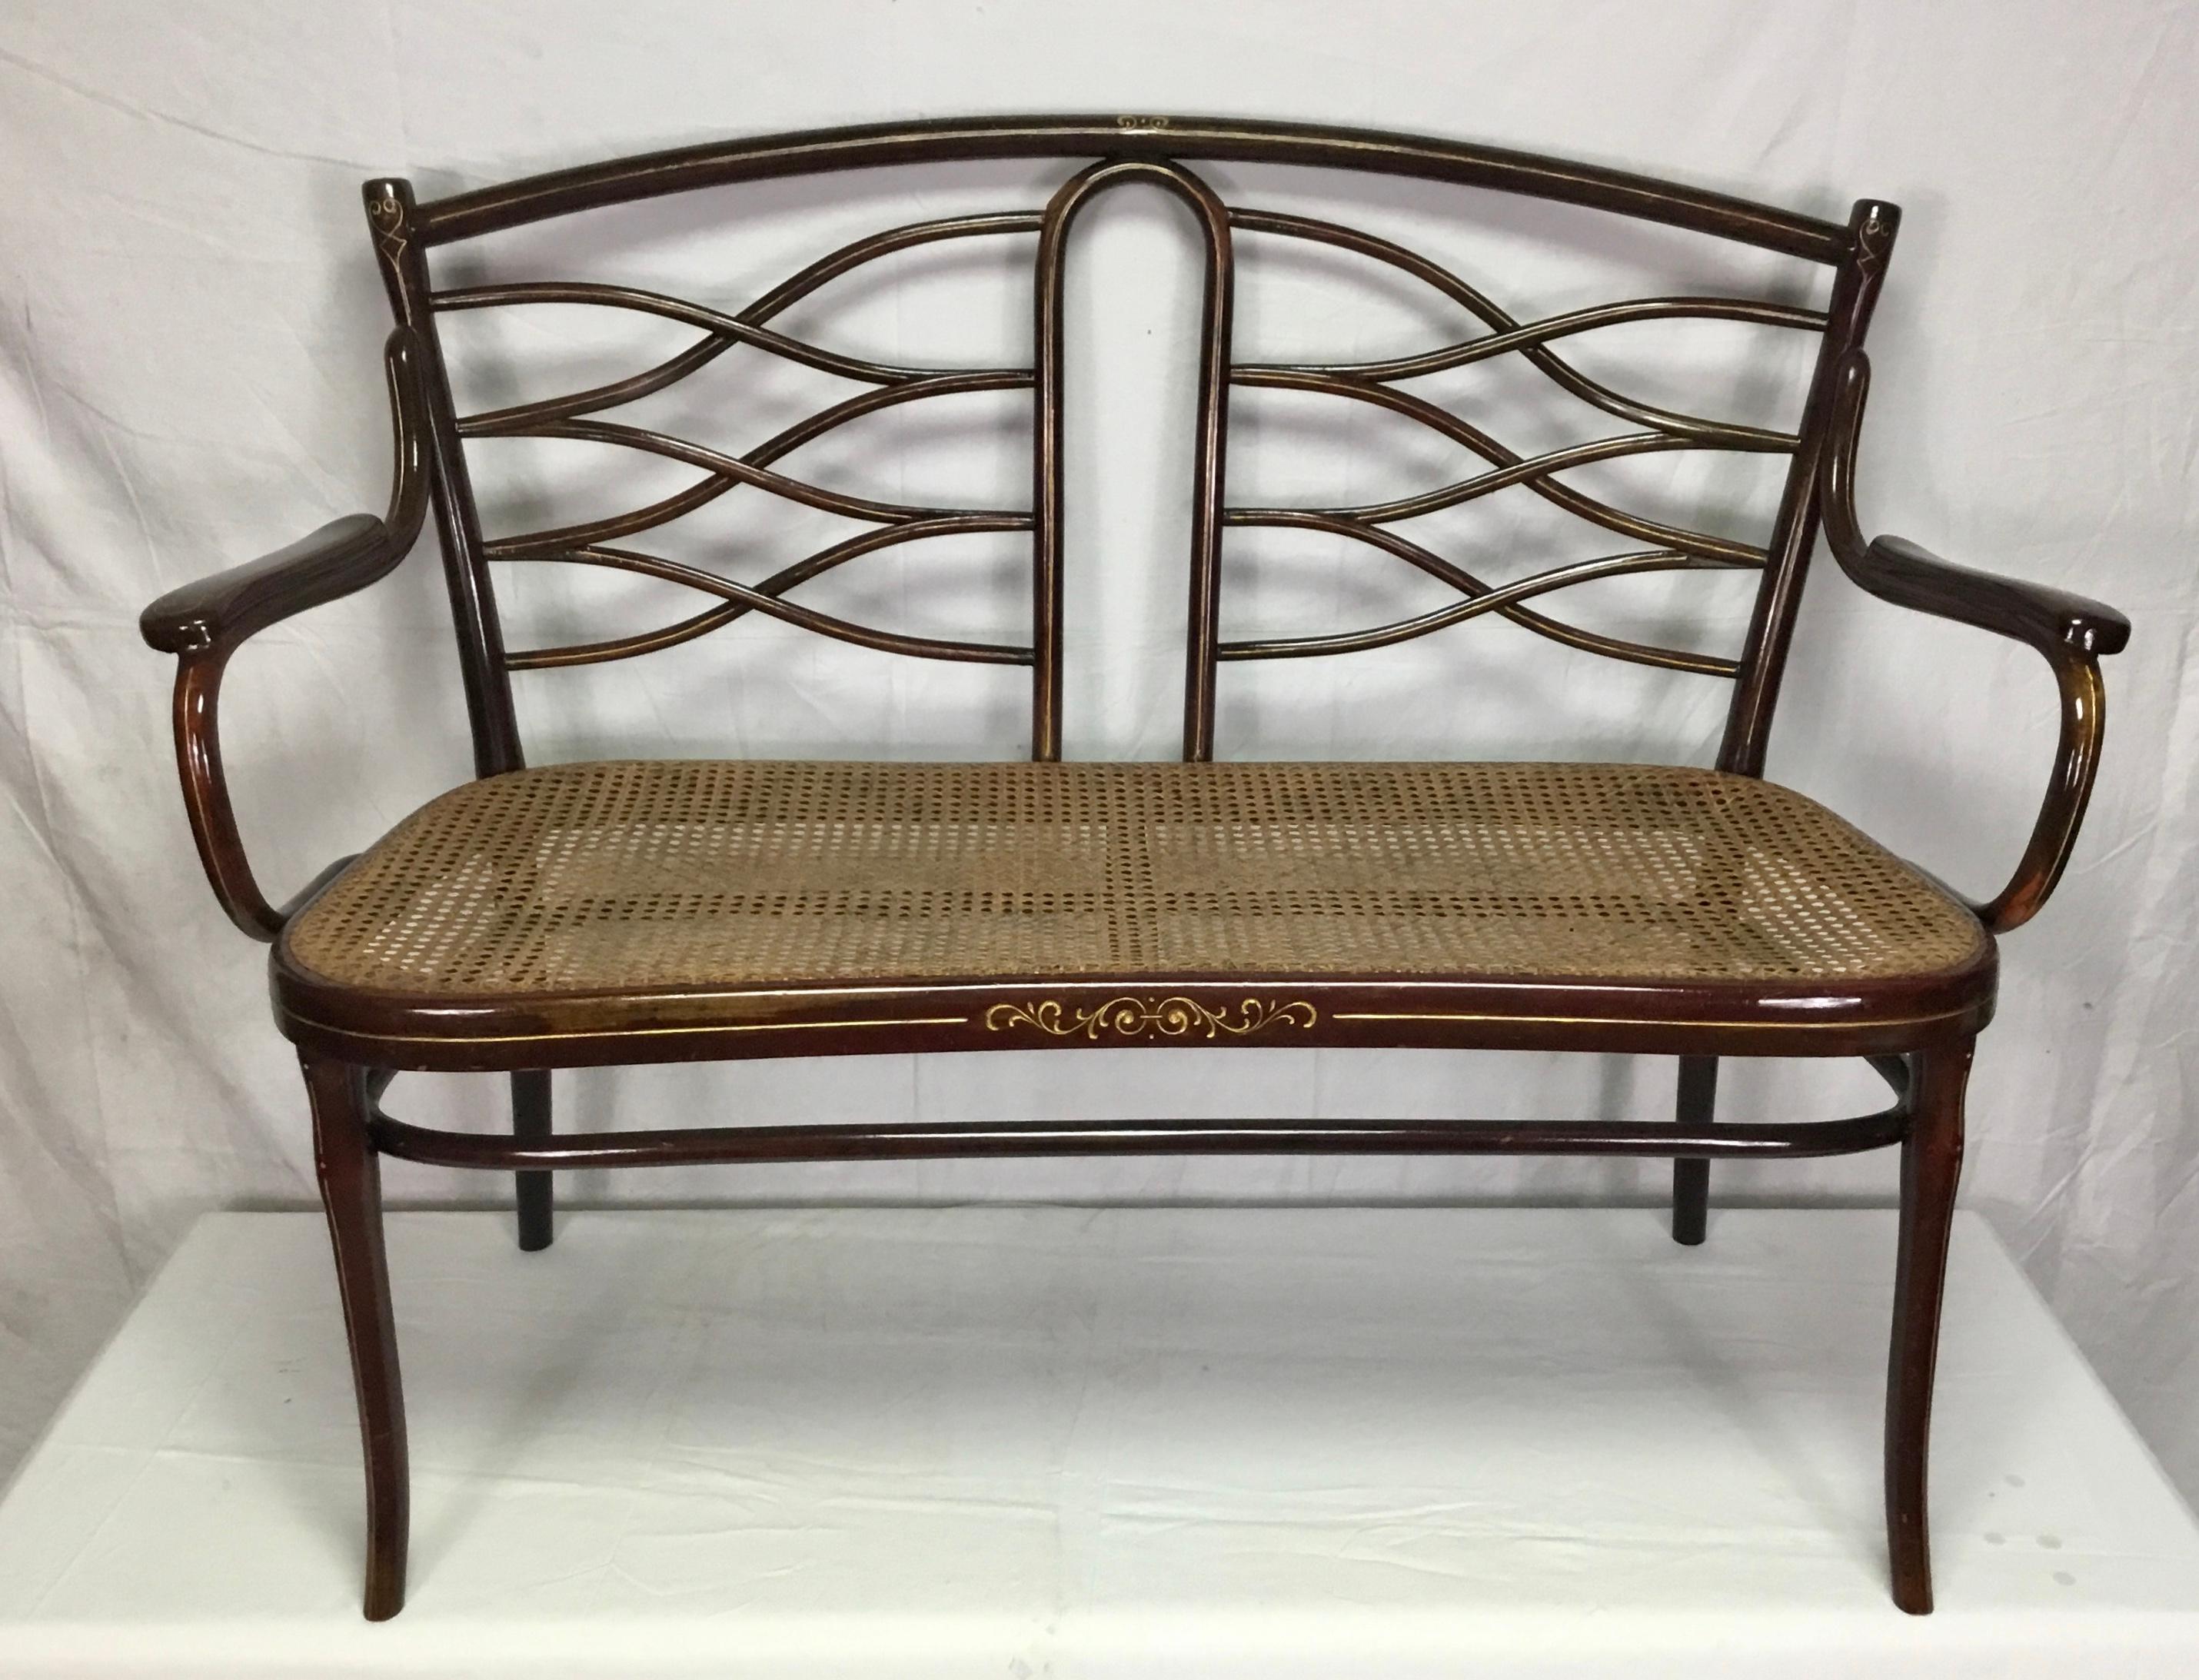 Belle Époque Banquette in bentwood and cane by Thonet, Austria, late 19th century